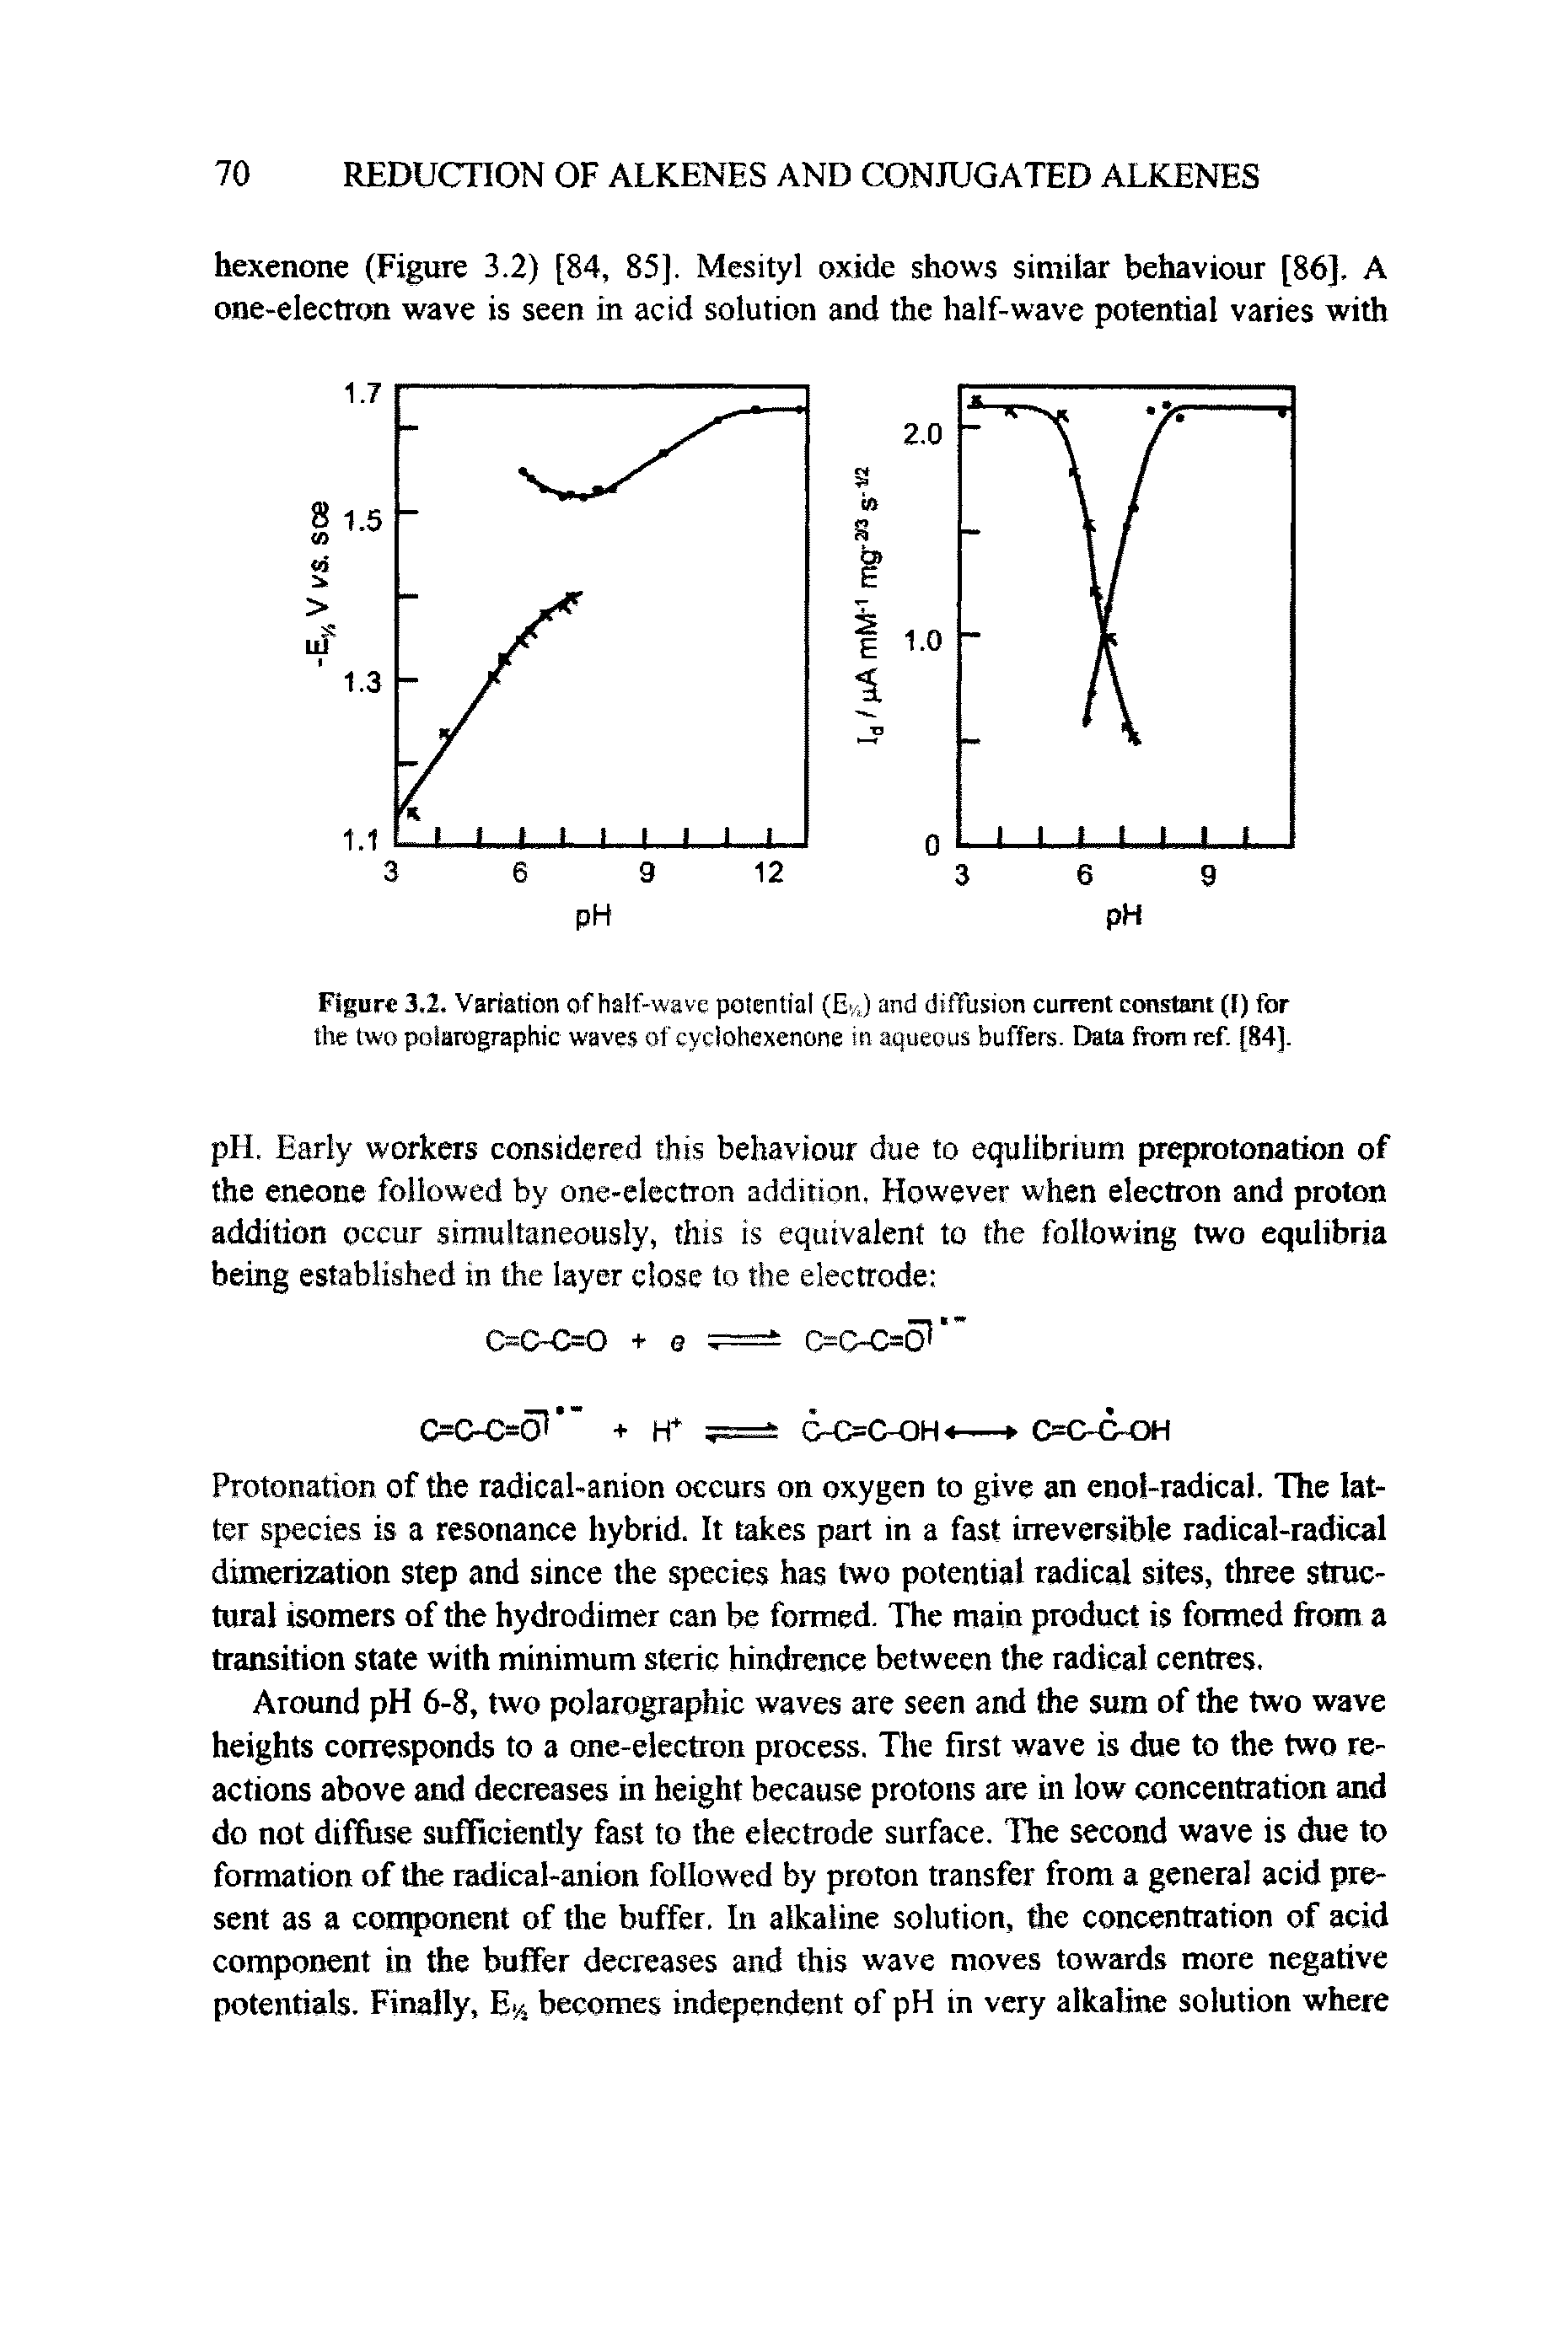 Figure 3.2. Variation of halt-wave potential (Ek) and diffusion current constant (I) for the two polarographic waves of cyclohexenone in aqueous buffers. Data from ref. [84].